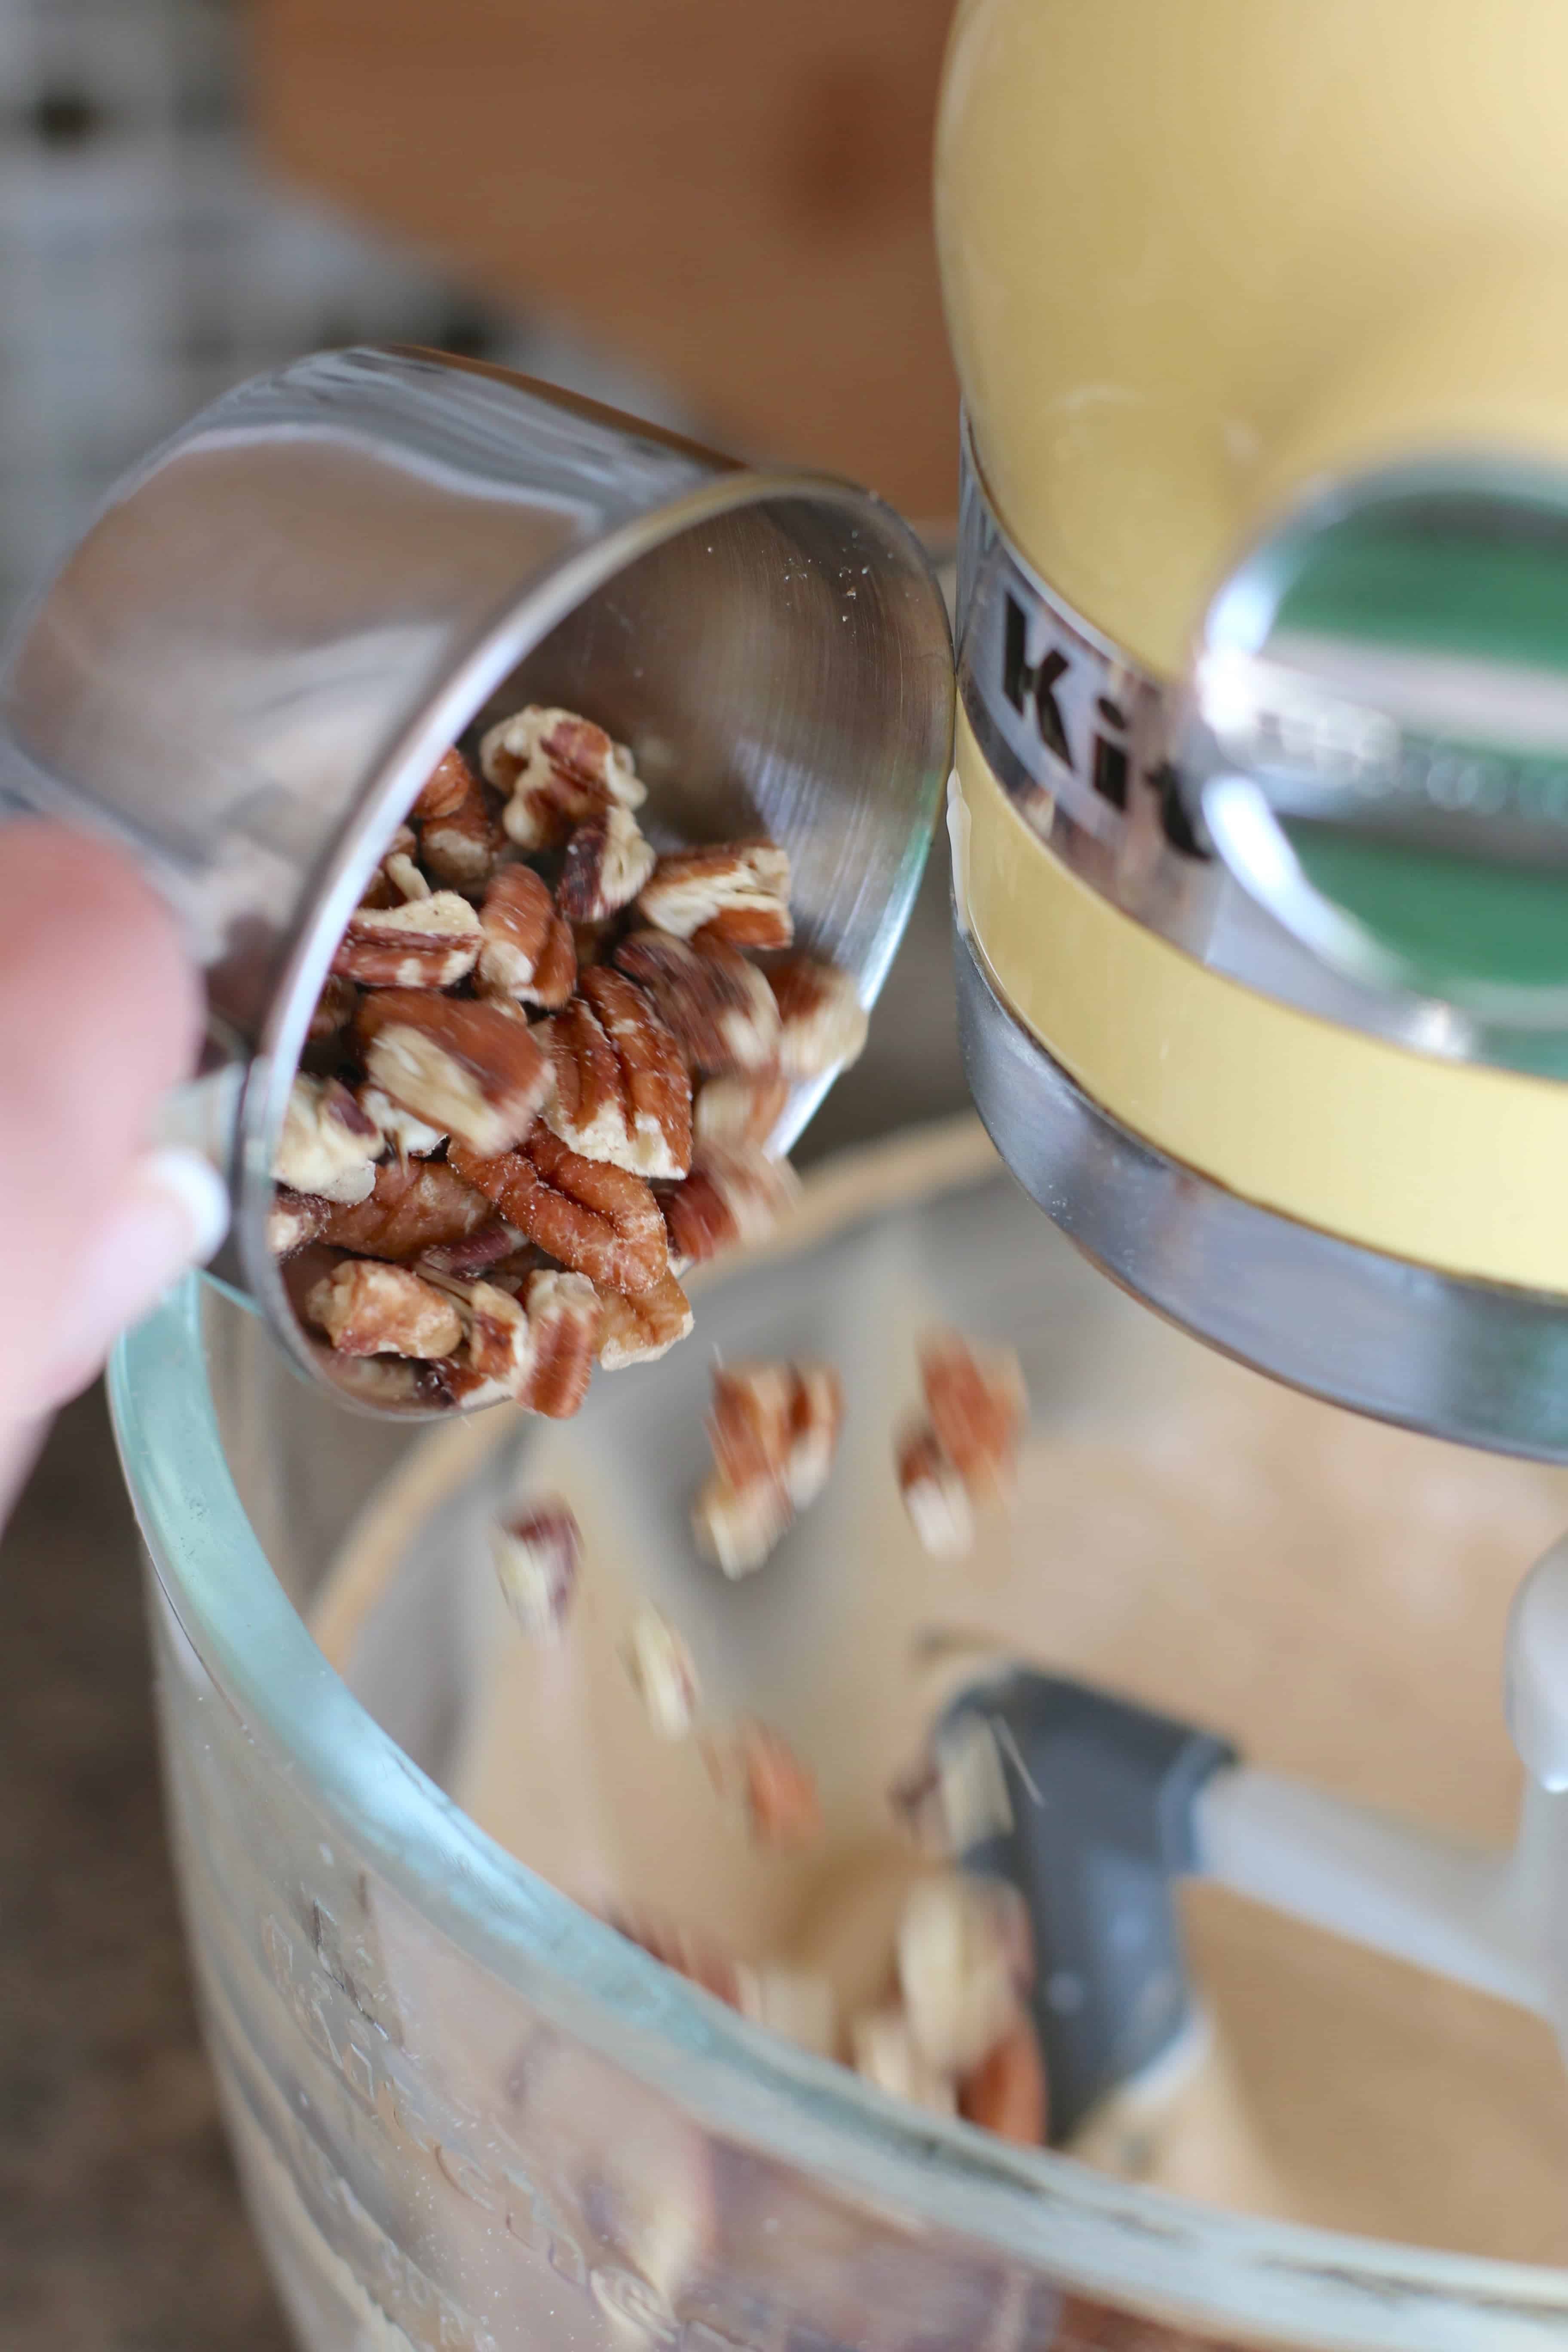 pecans added to muffin mix batter in a stand electric mixer.